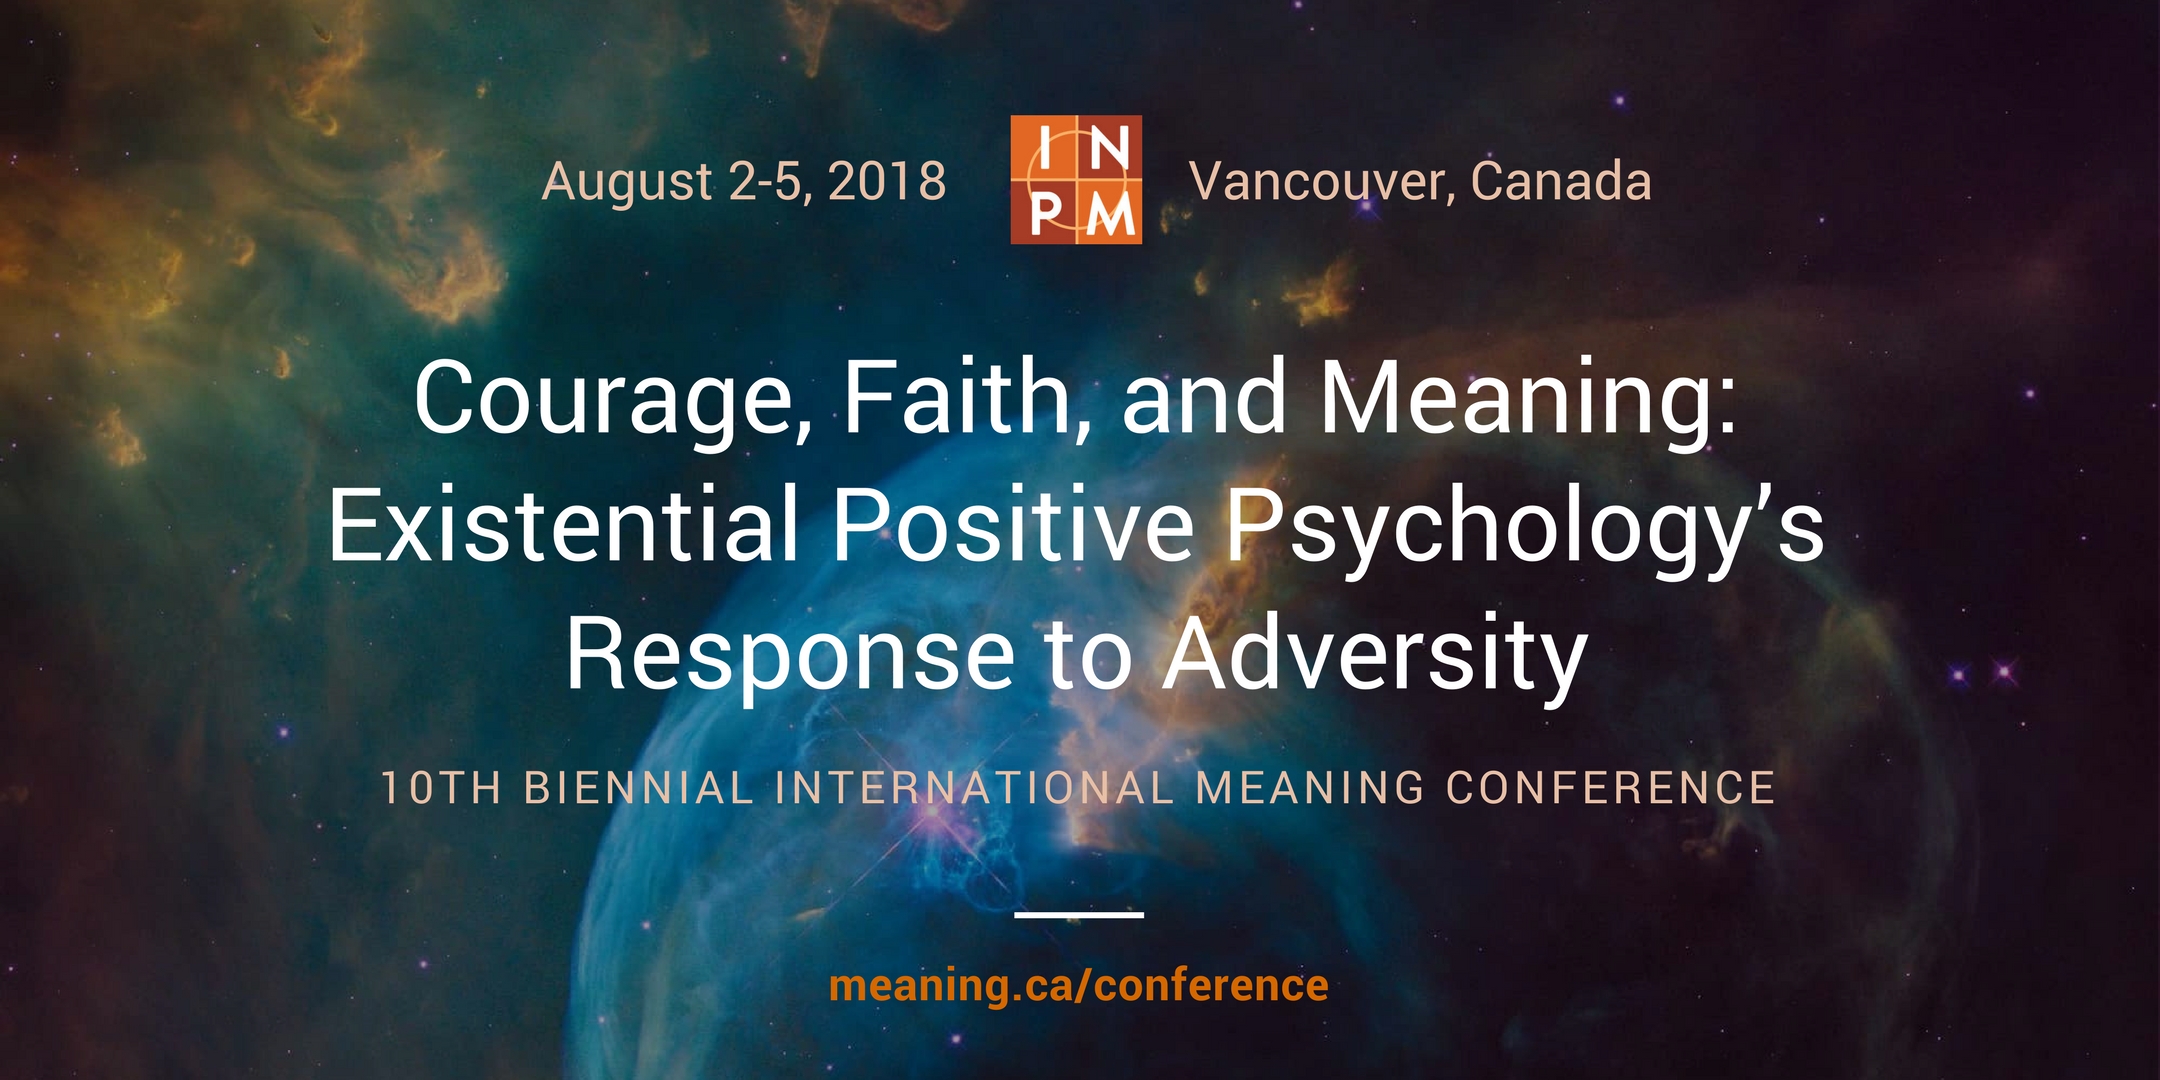 Meaning Conference 2018